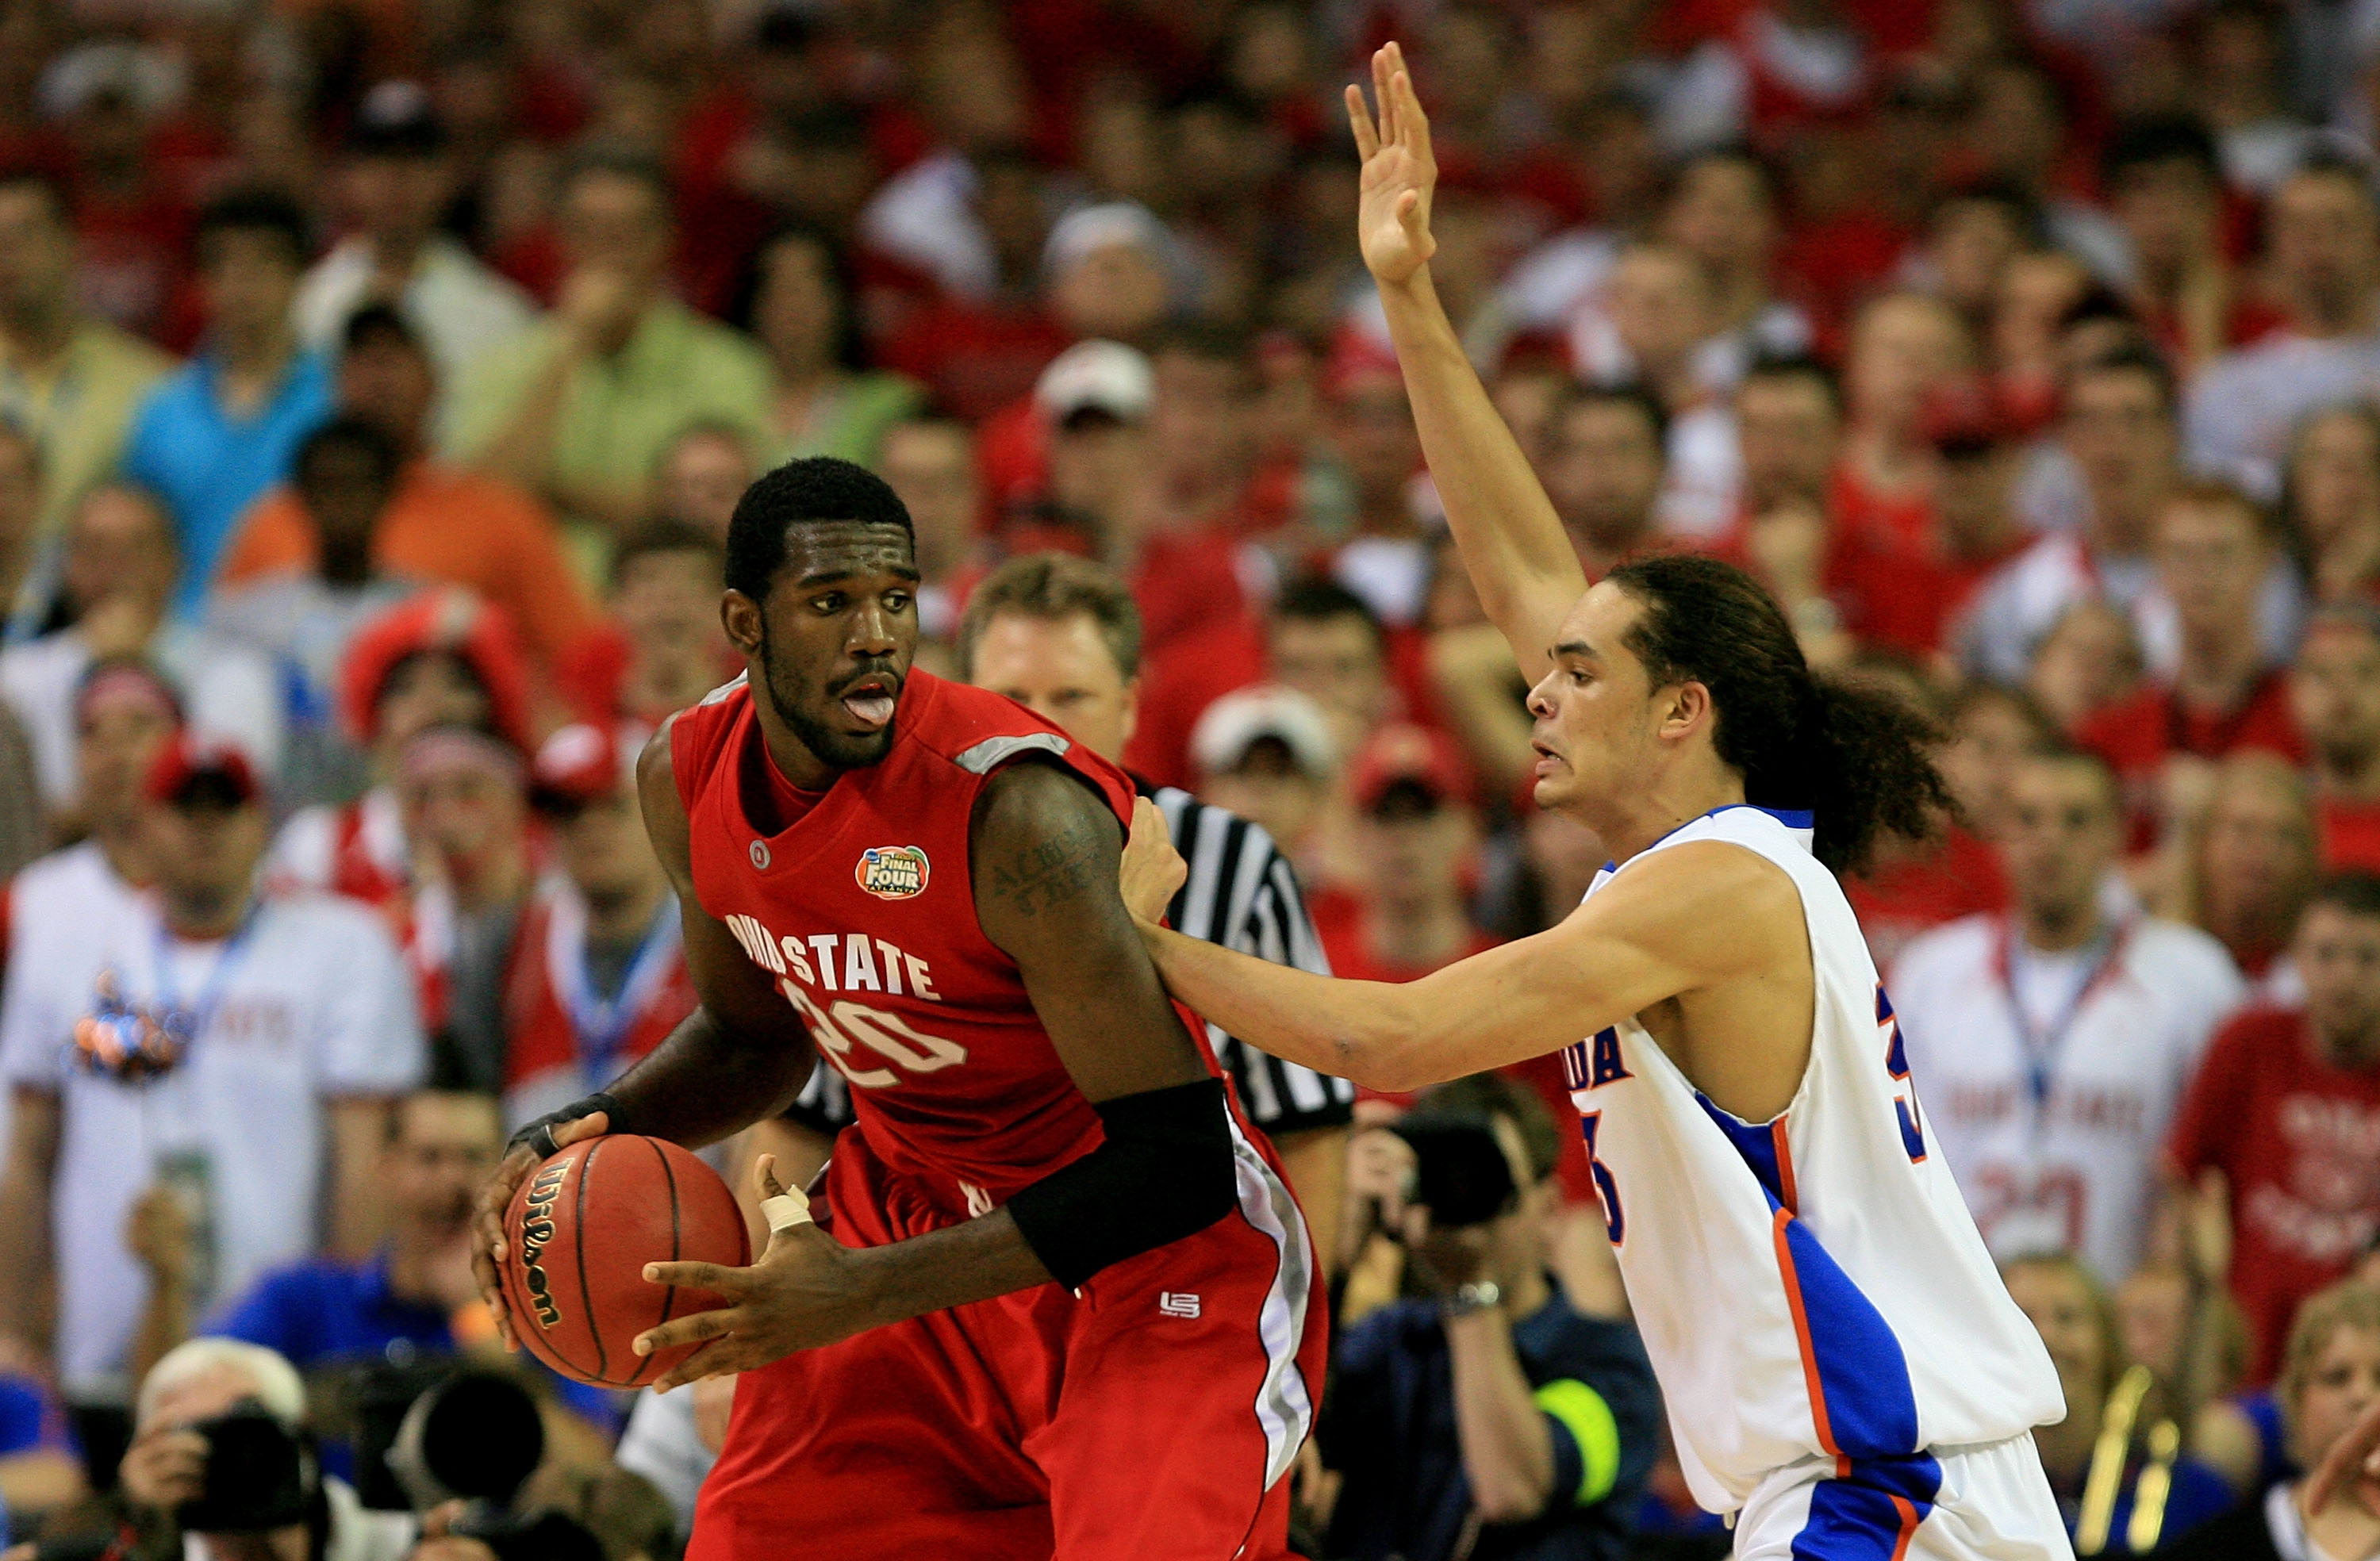 Former Ohio State basketball star Greg Oden posts up during the 2007 NCAA Championship